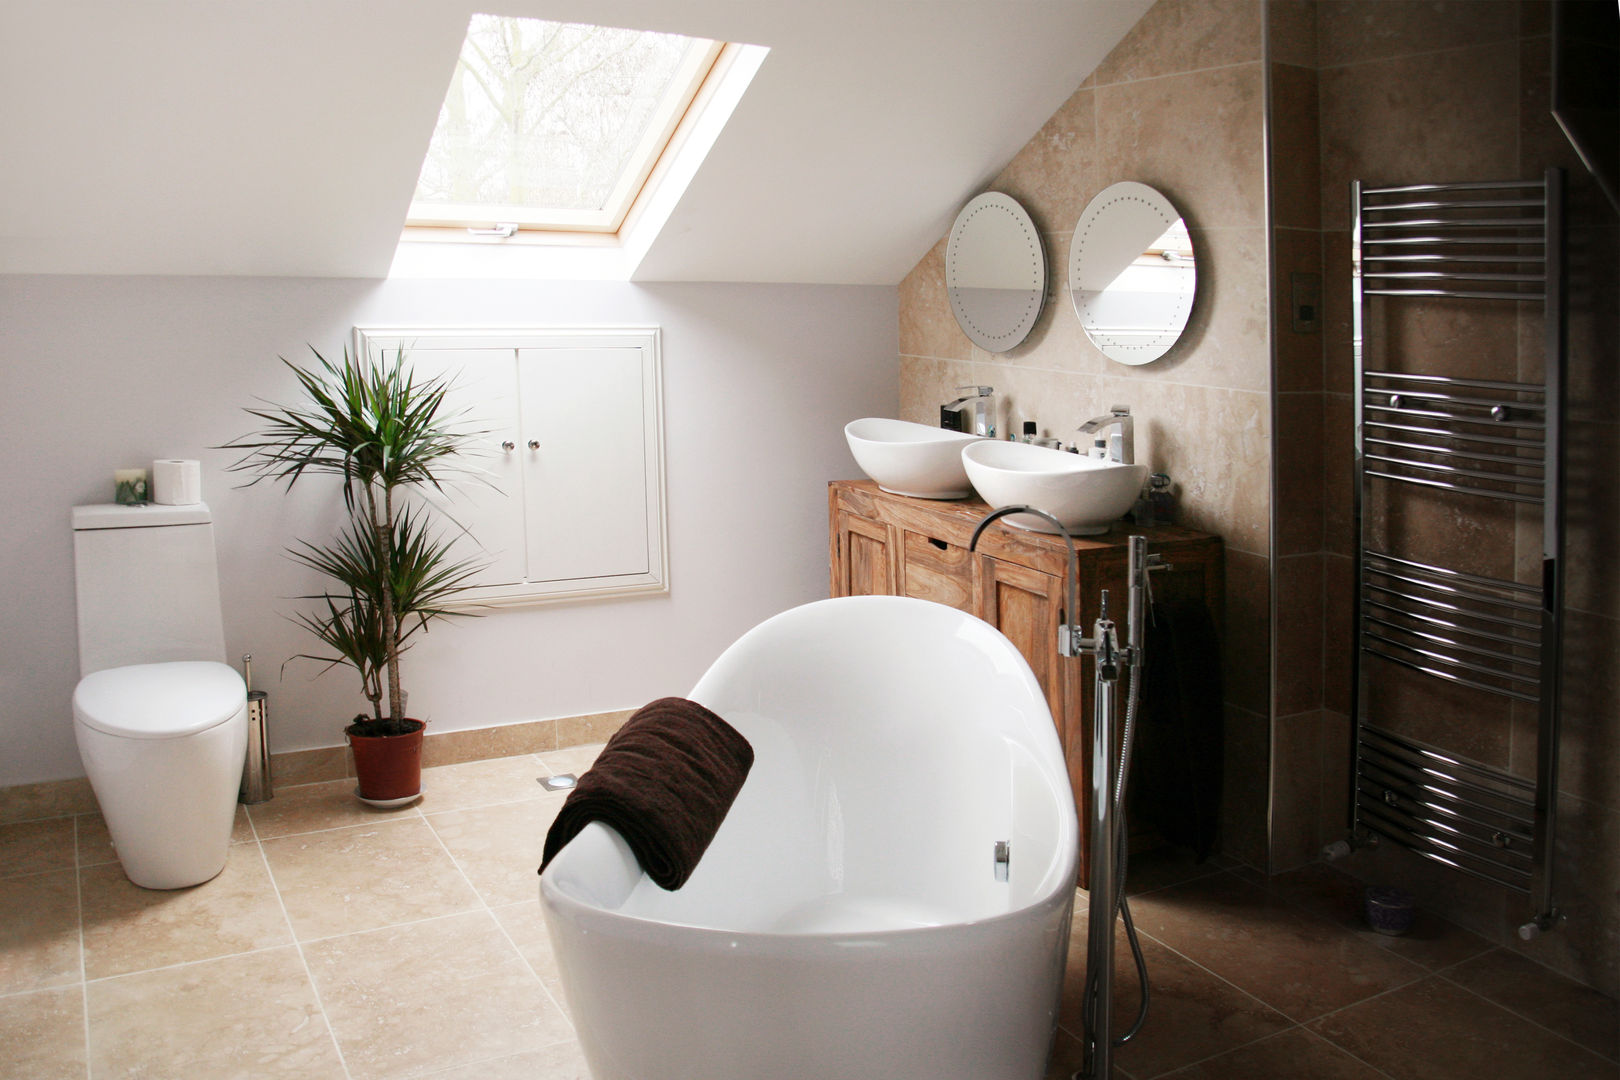 Chiswick, Hounslow W4, London | House extension GOAStudio London residential architecture limited Modern bathroom